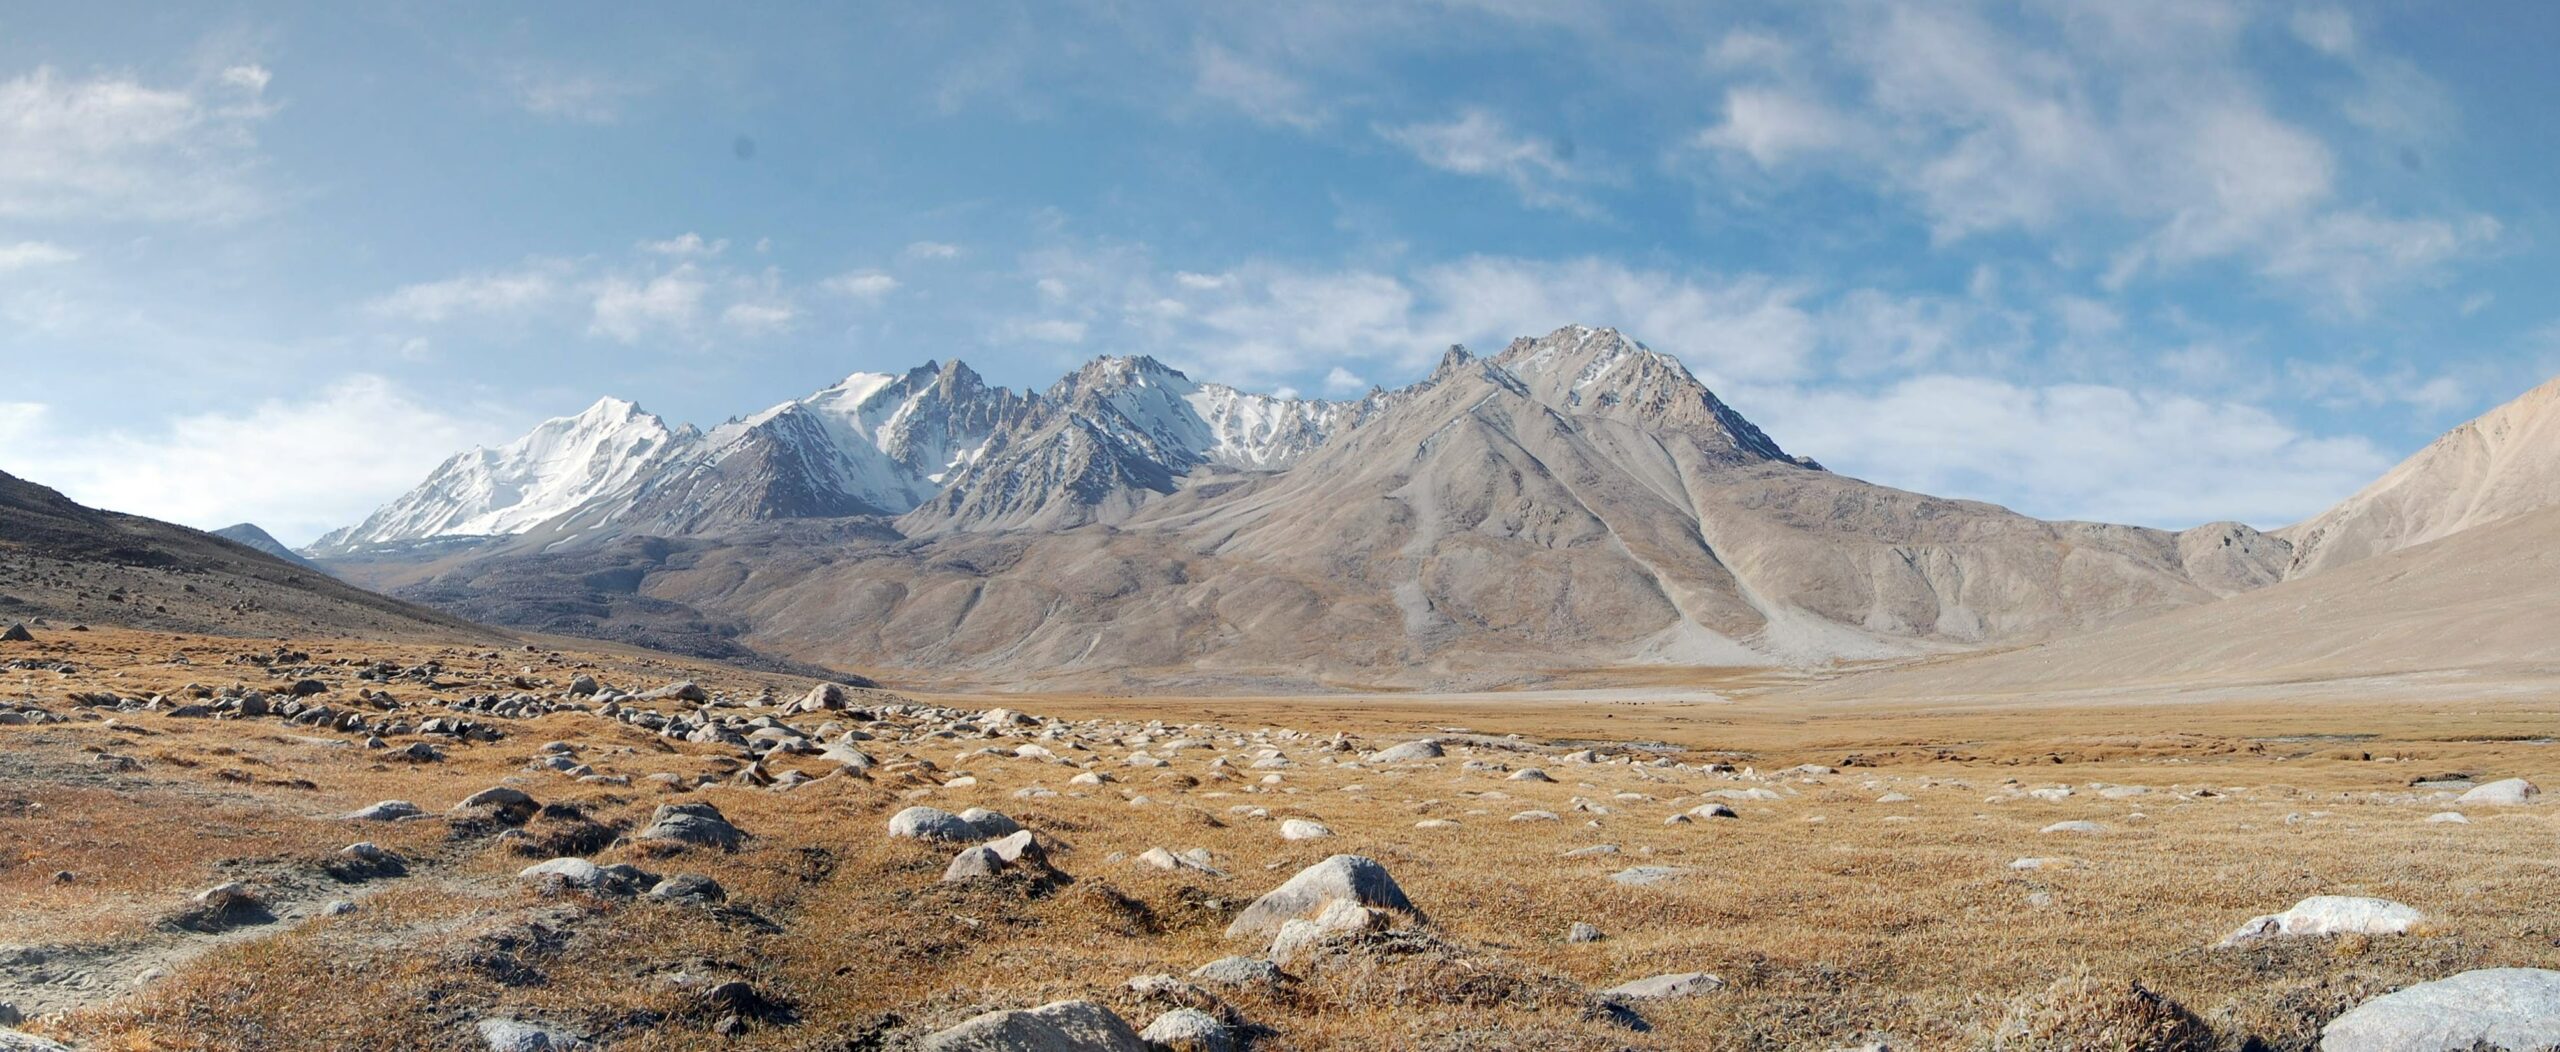 Great video from the University of Fribourg about PAMIR